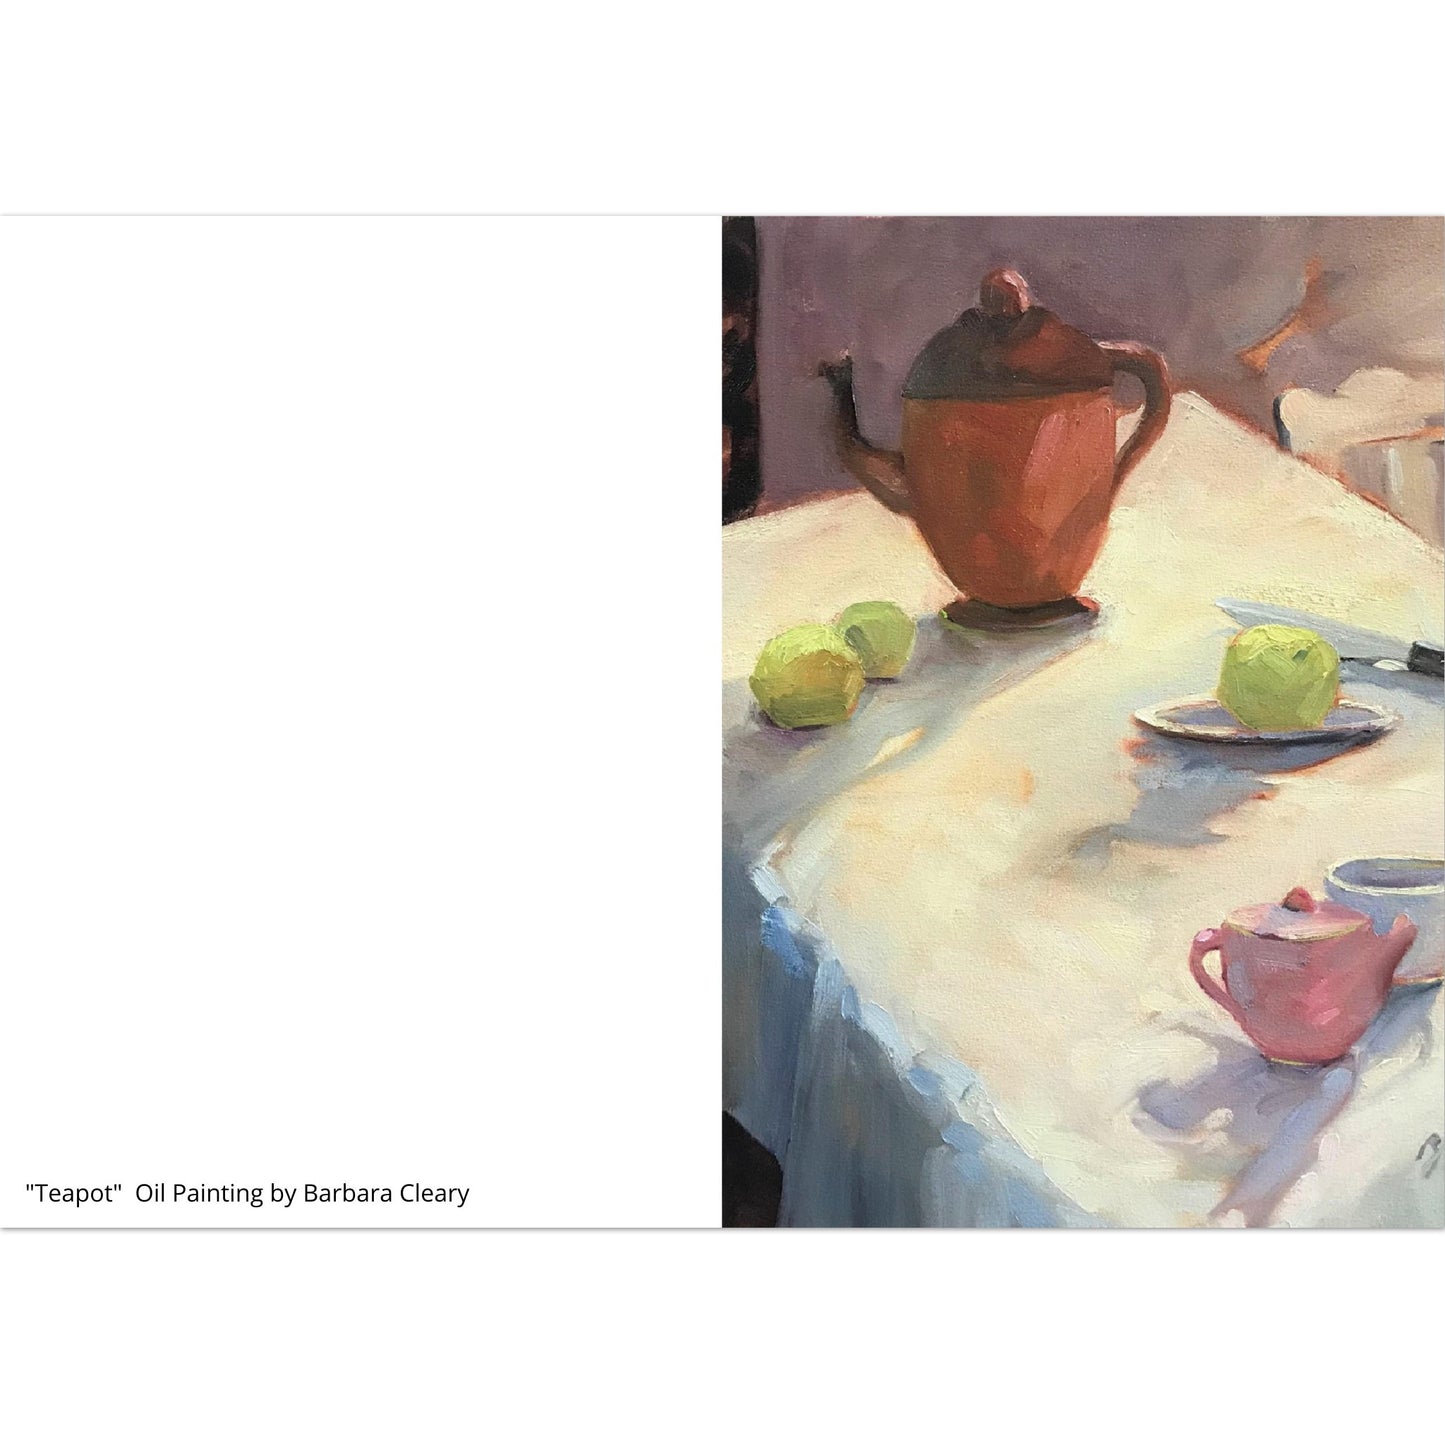 "Teapot" Pack of 10 Greeting Cards (standard envelopes) (US & CA) by Barbara Cleary Designs